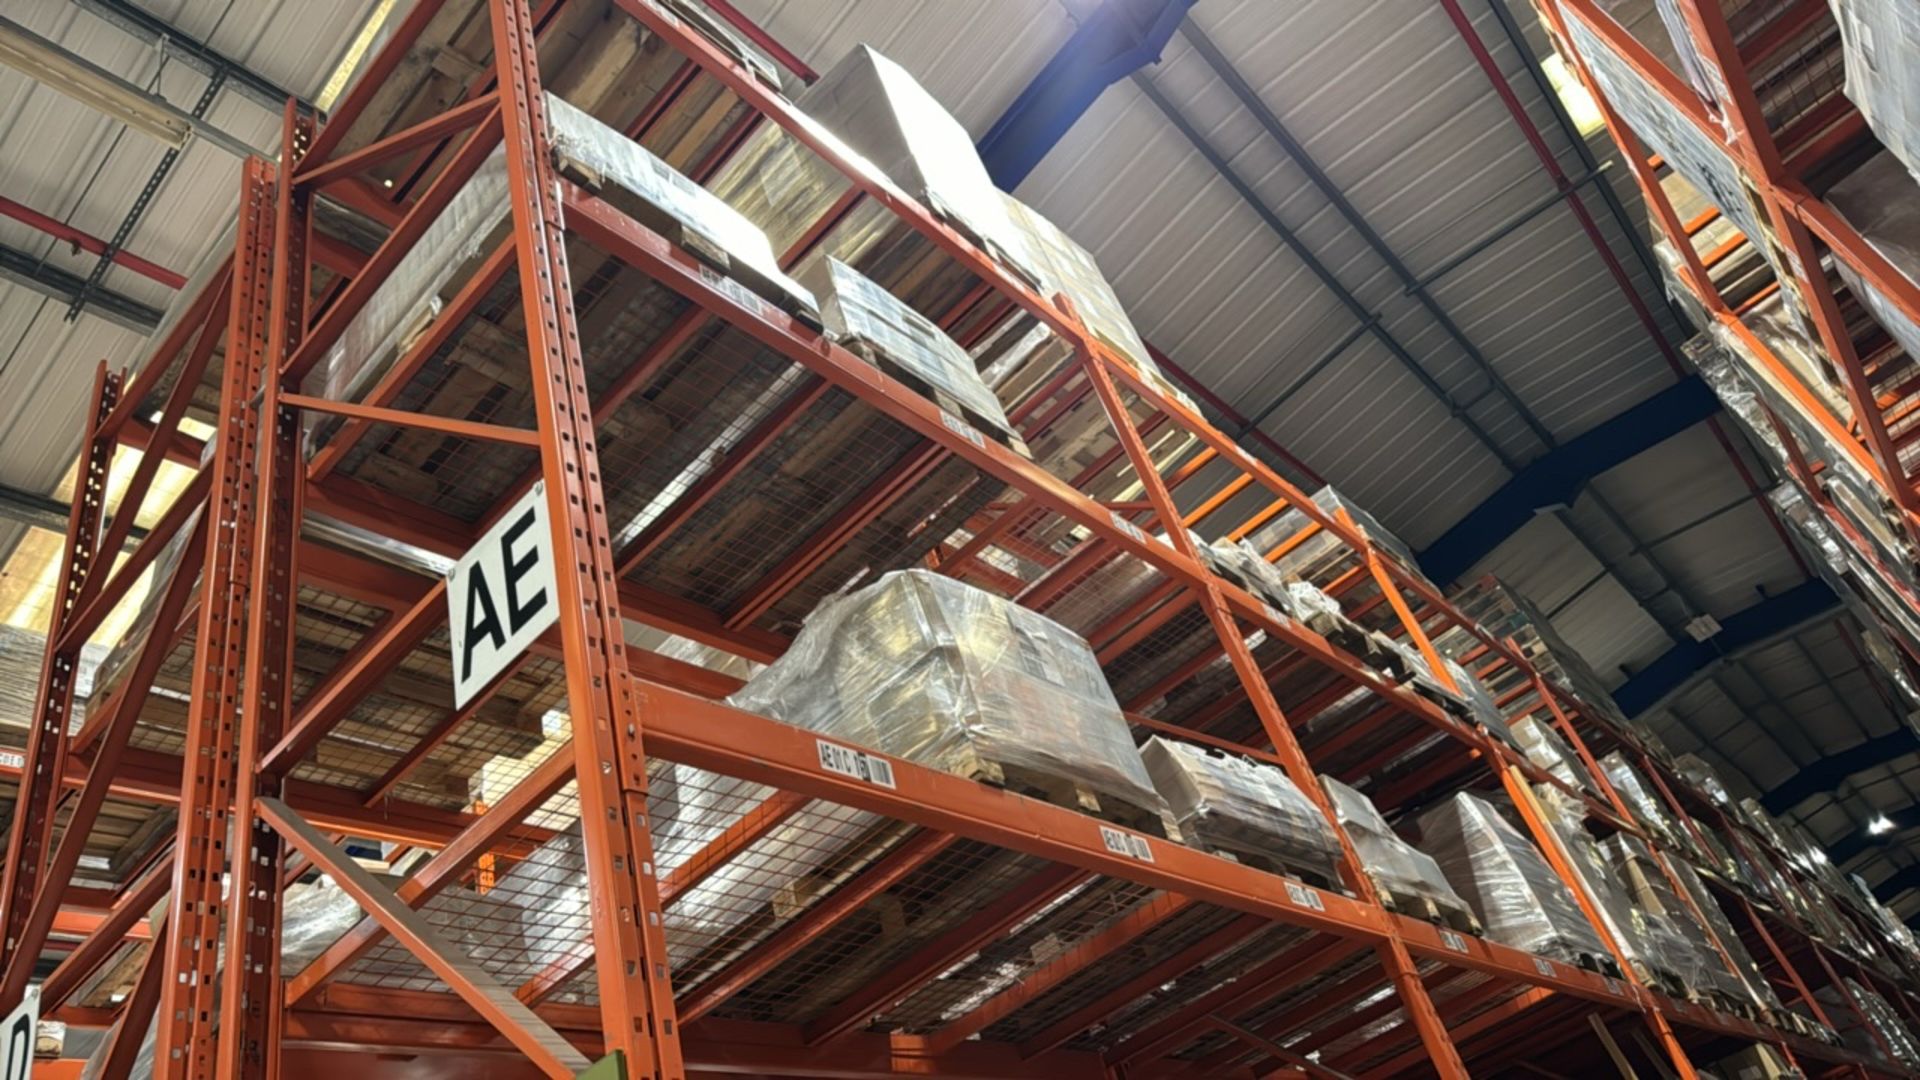 23 Bays Of Boltless Pallet Racking - Image 3 of 9